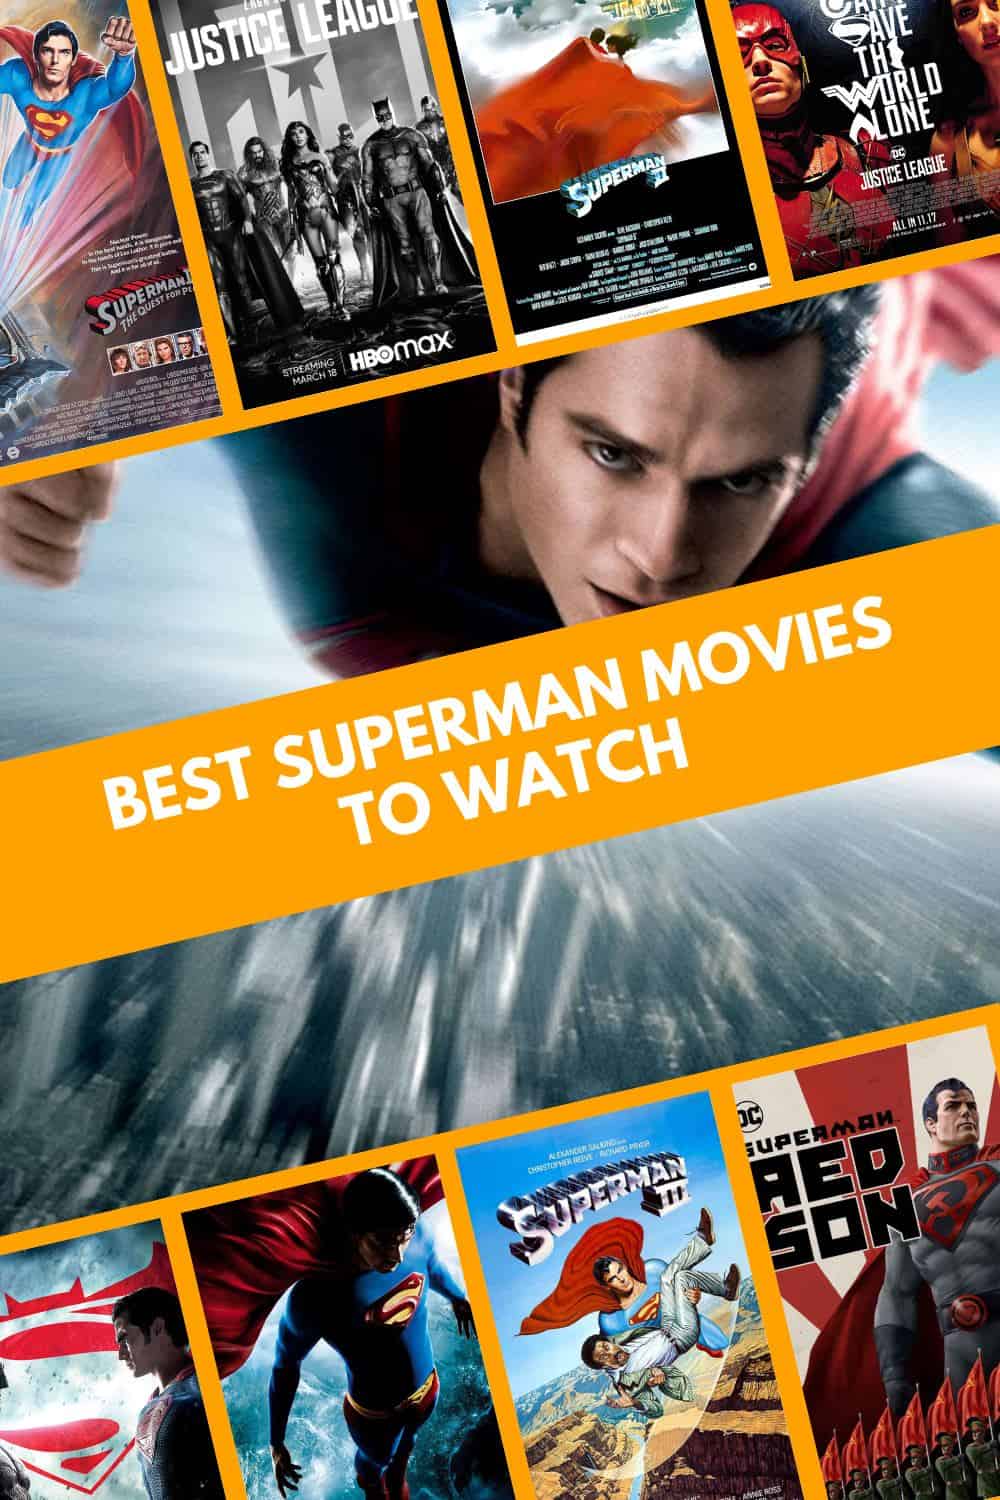 Superman Movies to Watch (Ranked)